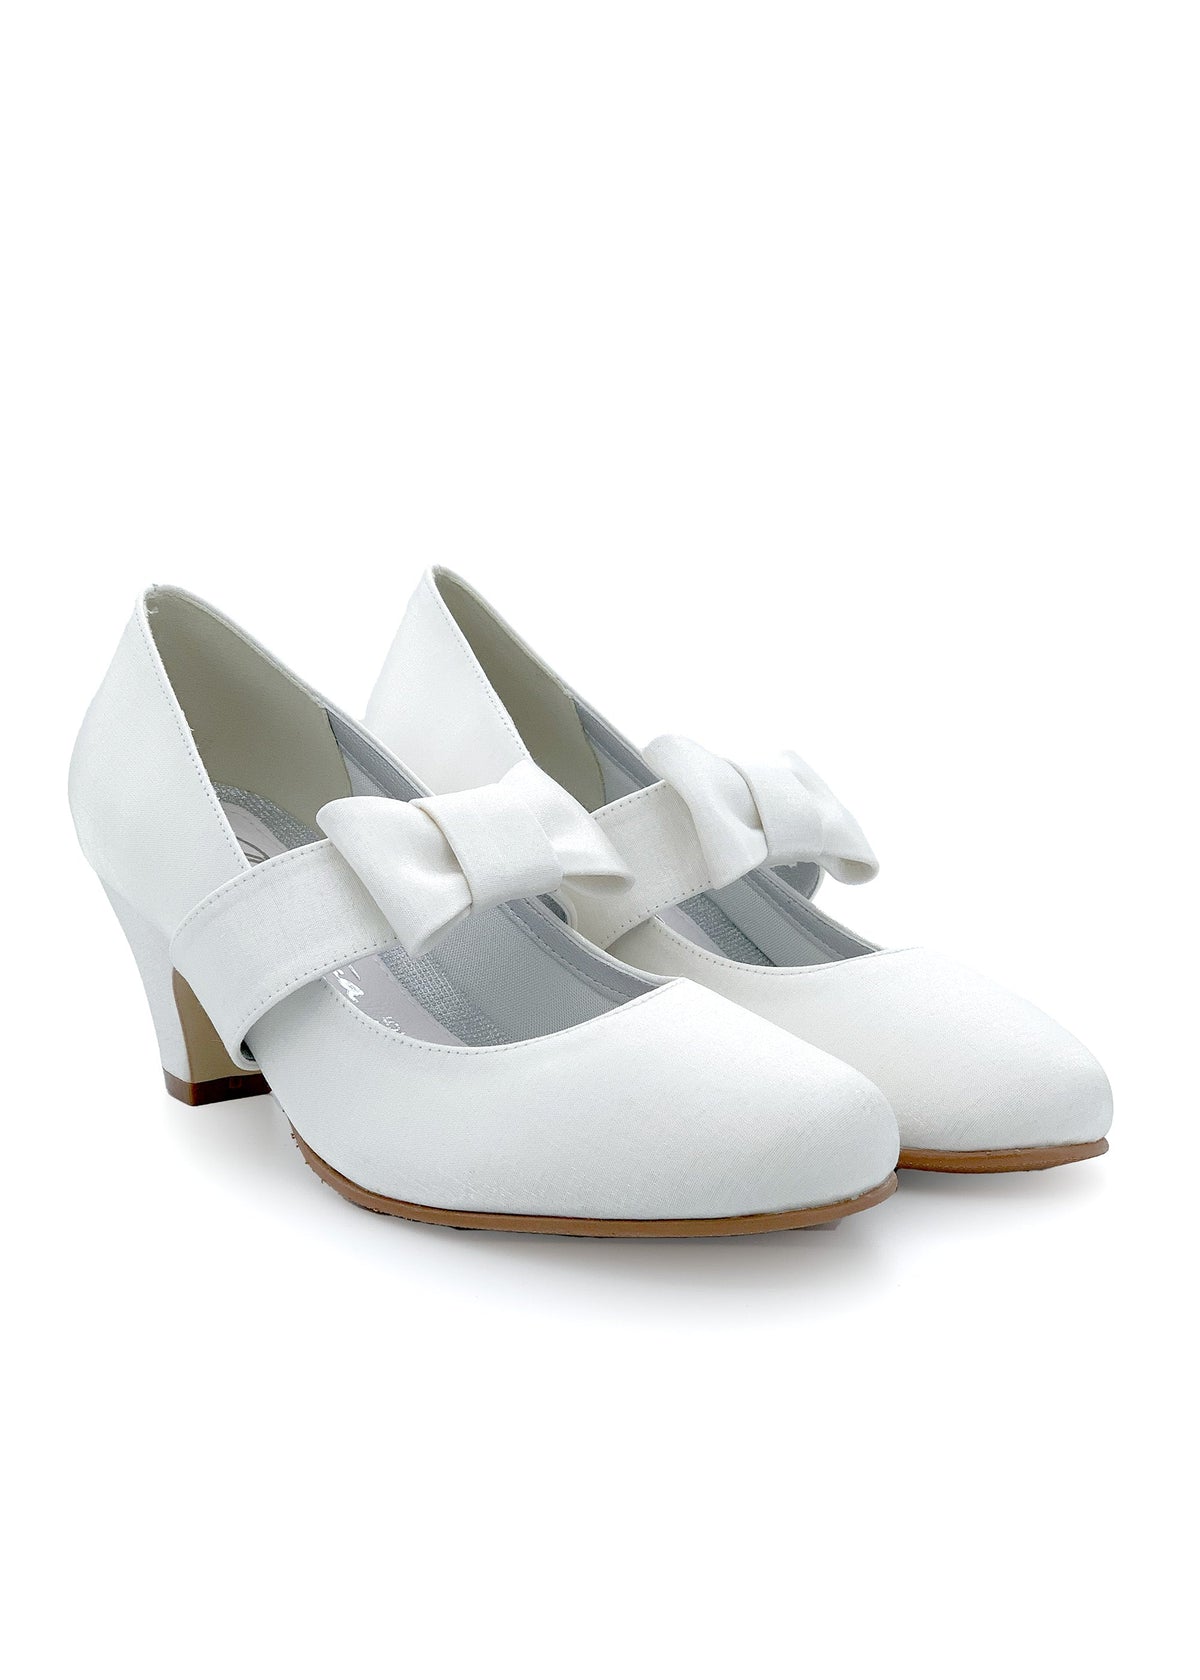 Open-toed shoes with bow straps - white satin fabric